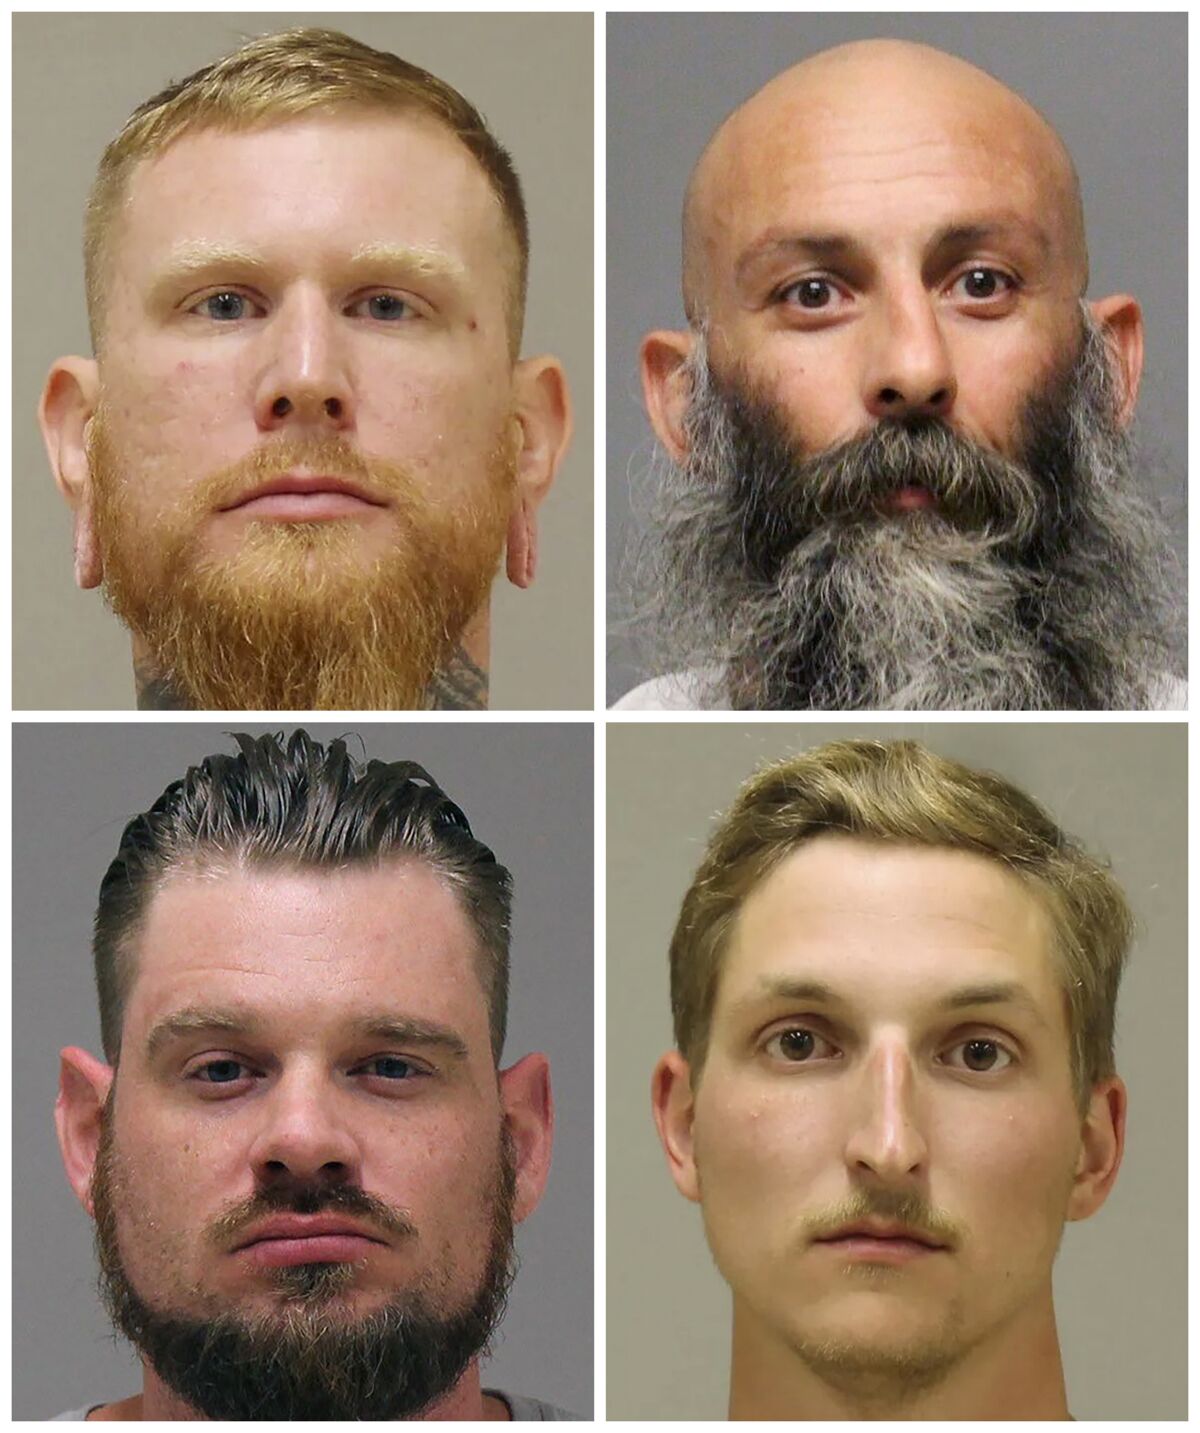 FILE - This combination of photos provided by the Kent County Sheriff and the Delaware Department of Justice shows, top row from left, Brandon Caserta and Barry Croft; and bottom row from left, Adam Dean Fox and Daniel Harris. The four members of anti-government groups are facing trial in March 2022 on federal charges accusing them in a plot to abduct Michigan's Democratic Gov. Gretchen Whitmer in 2020. Jury selection begins Tuesday, March 8, 2022, in a trial the presiding judge at the U.S. District Court courthouse in Grand Rapids, Mich., said could take over a month. (Kent County Sheriff, Delaware Department of Justice via AP File)